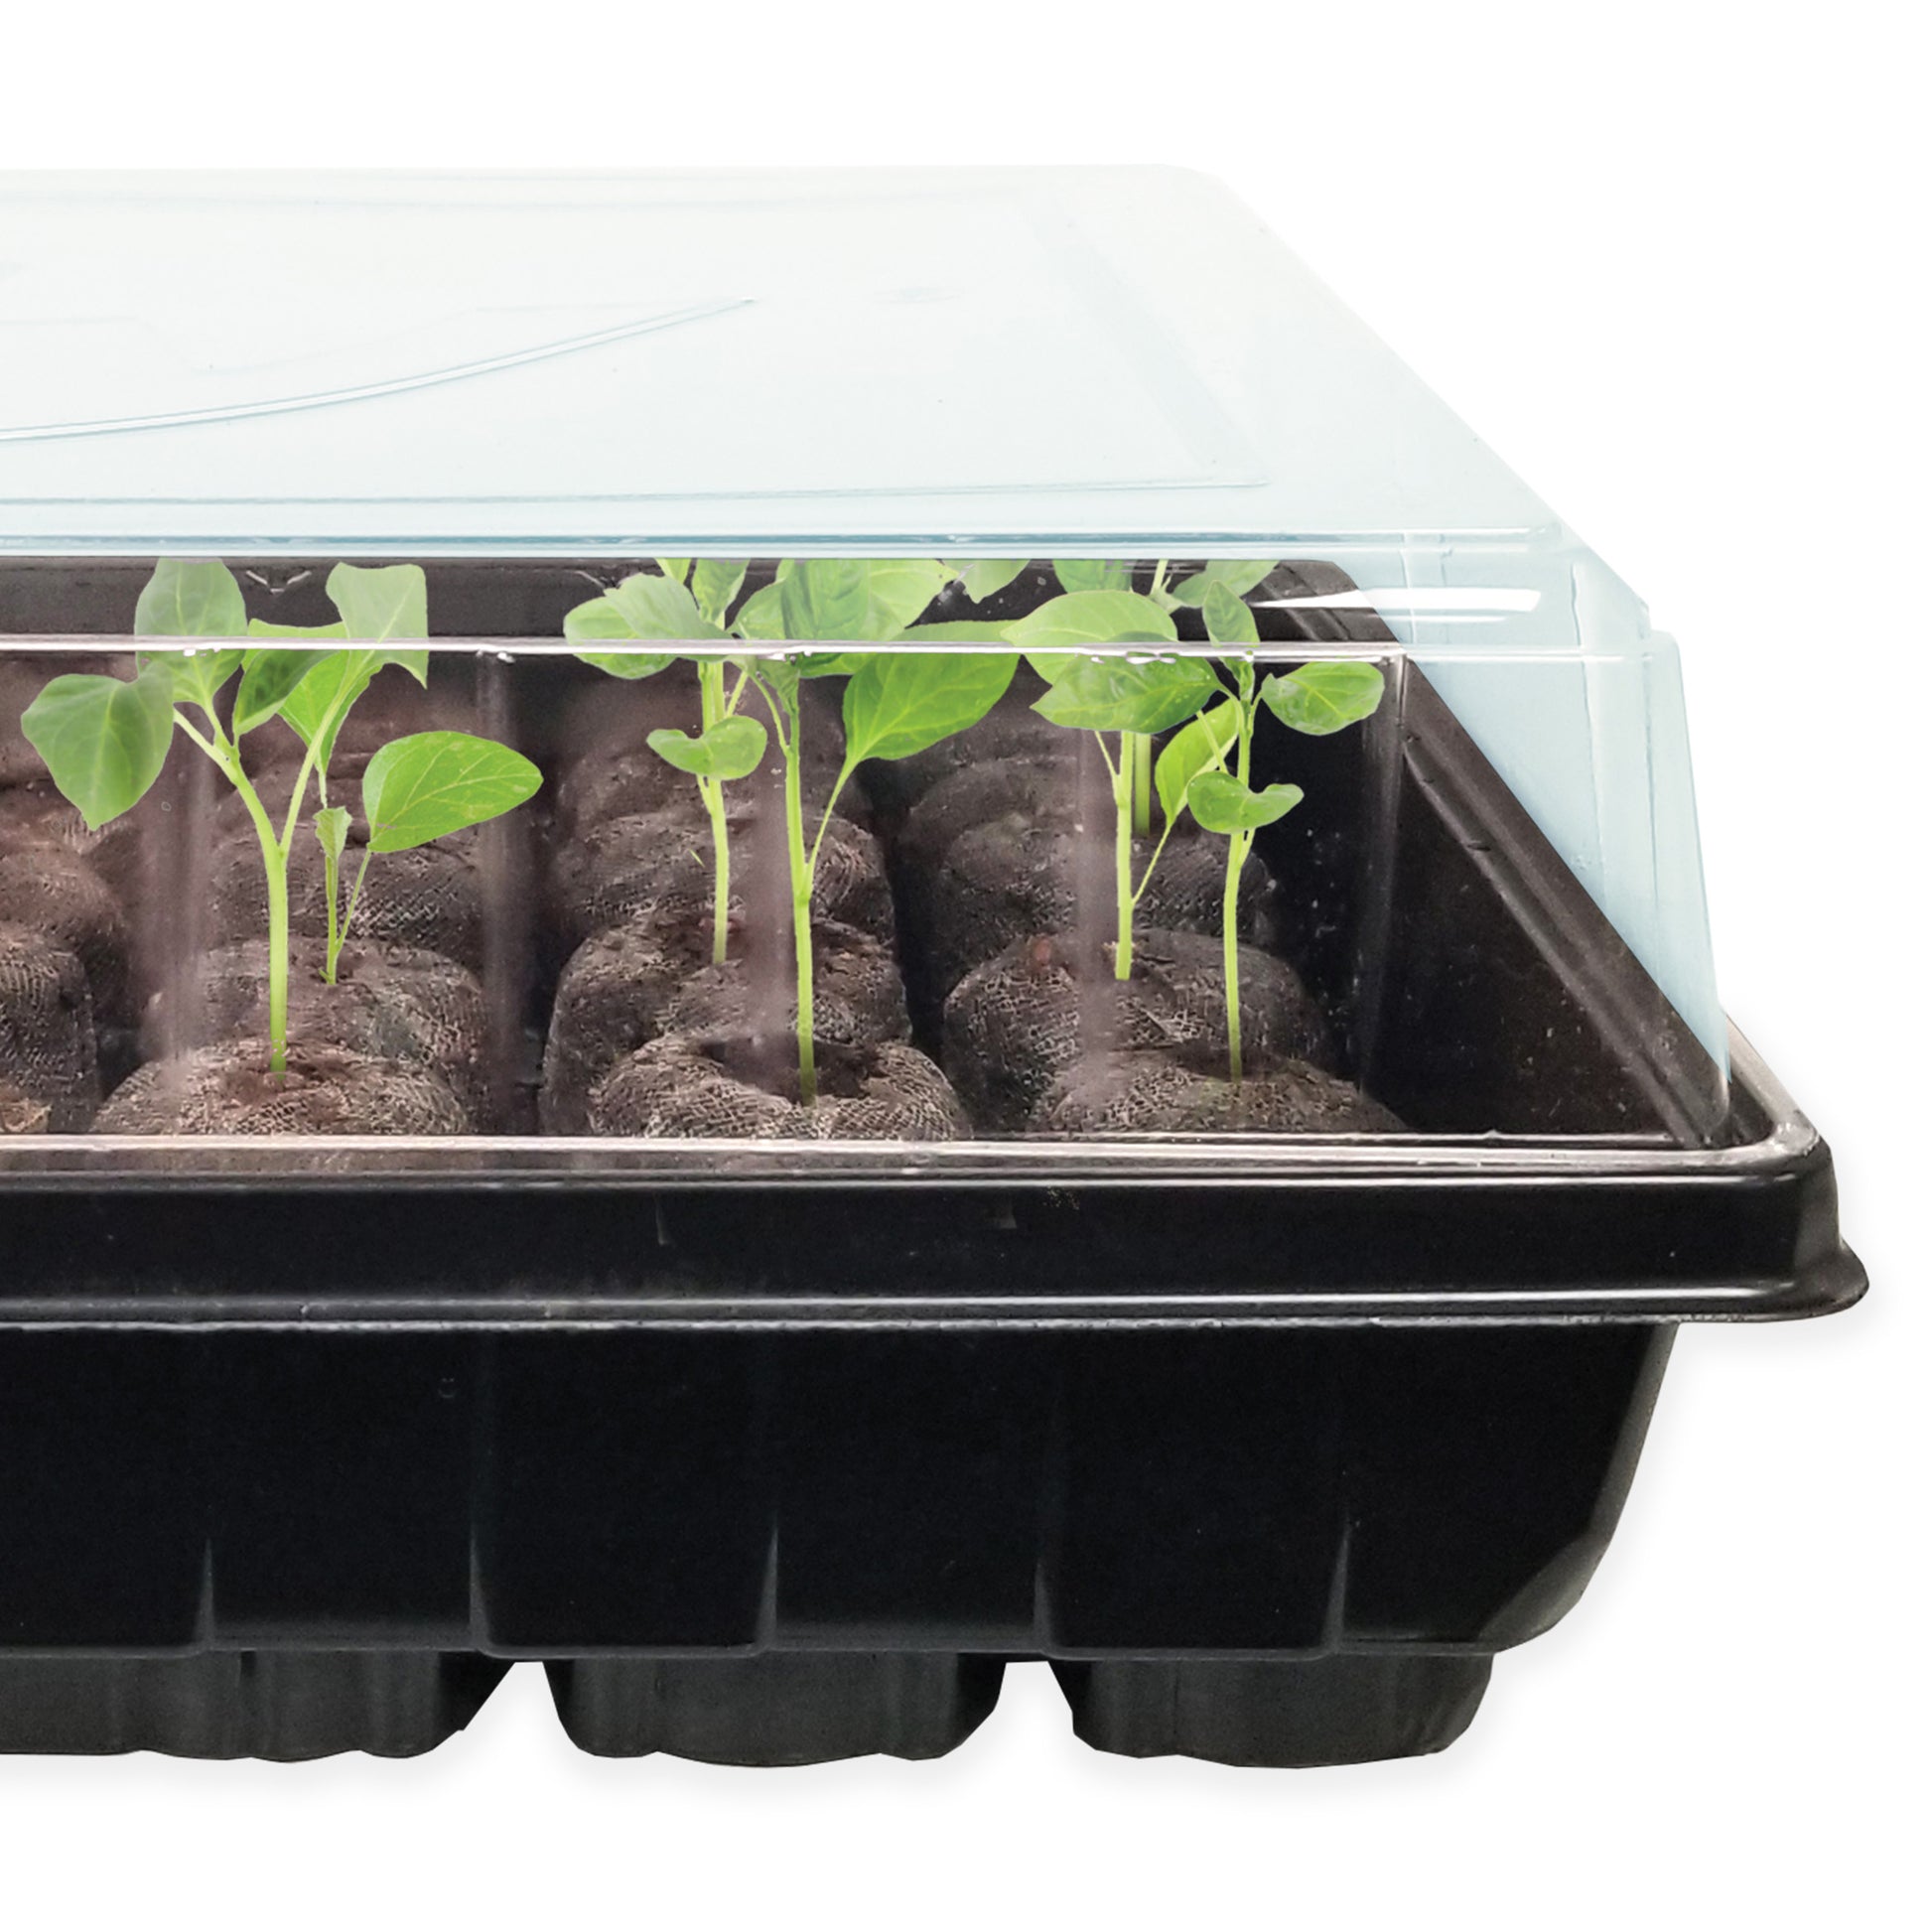 After you have sown your seeds, which are not included in this greenhouse, you can then place the clear humidity dome on top of the tray. Soon enough you will have young and healthy seedlings sprouting through the pellets!